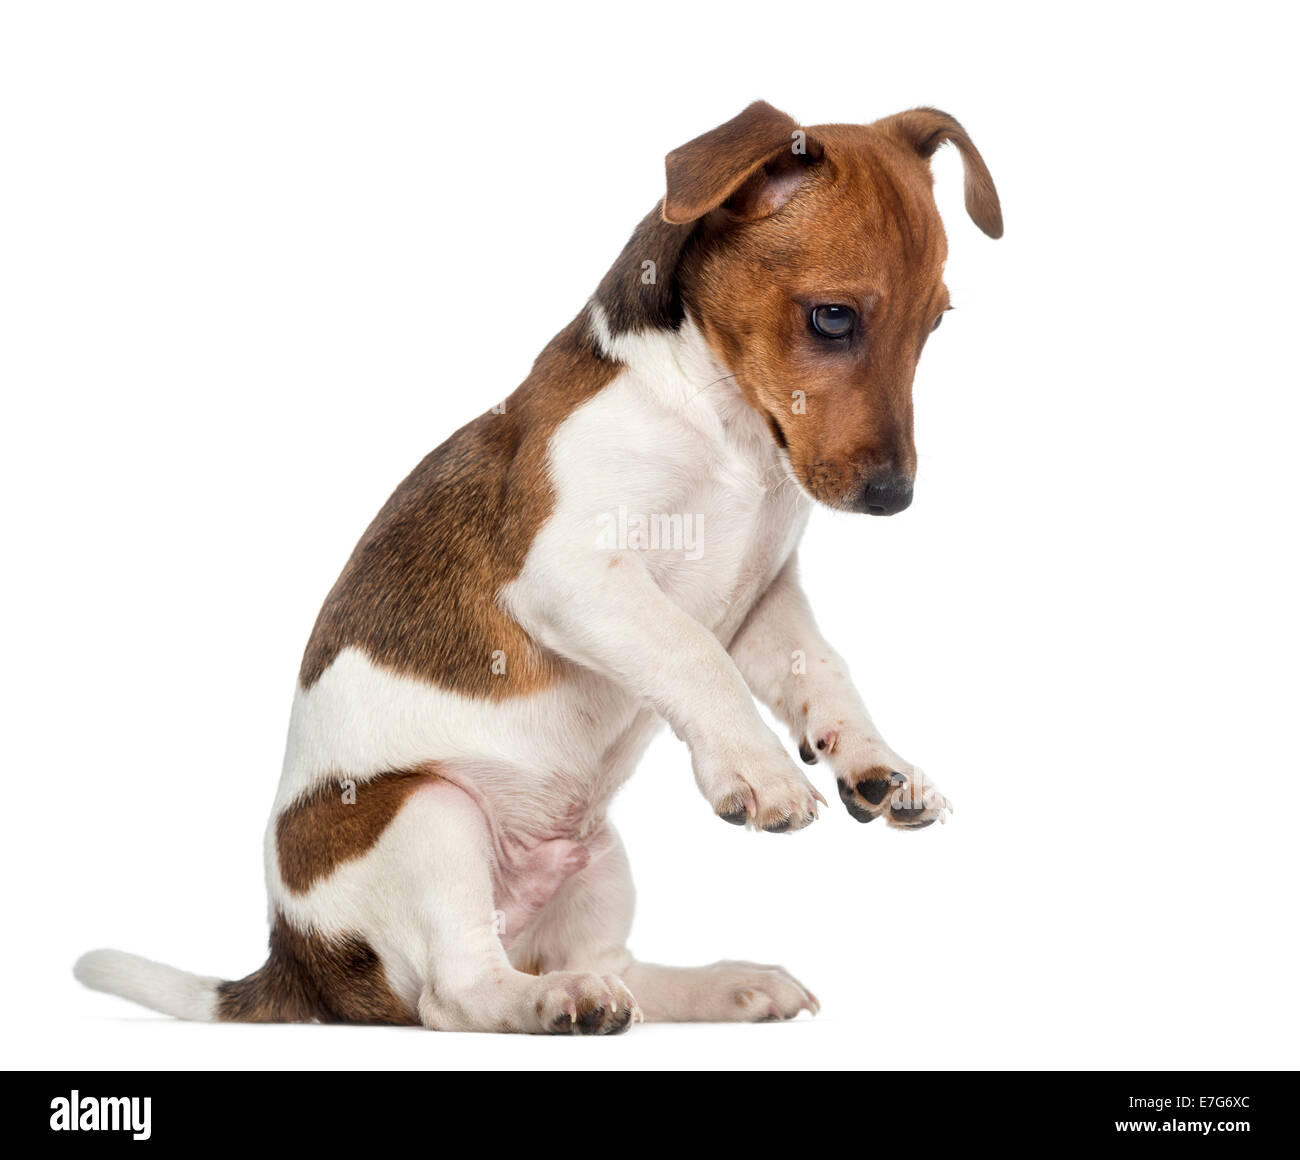 Jack Russell Terrier puppy on hind legs (3 months old) against white background Stock Photo